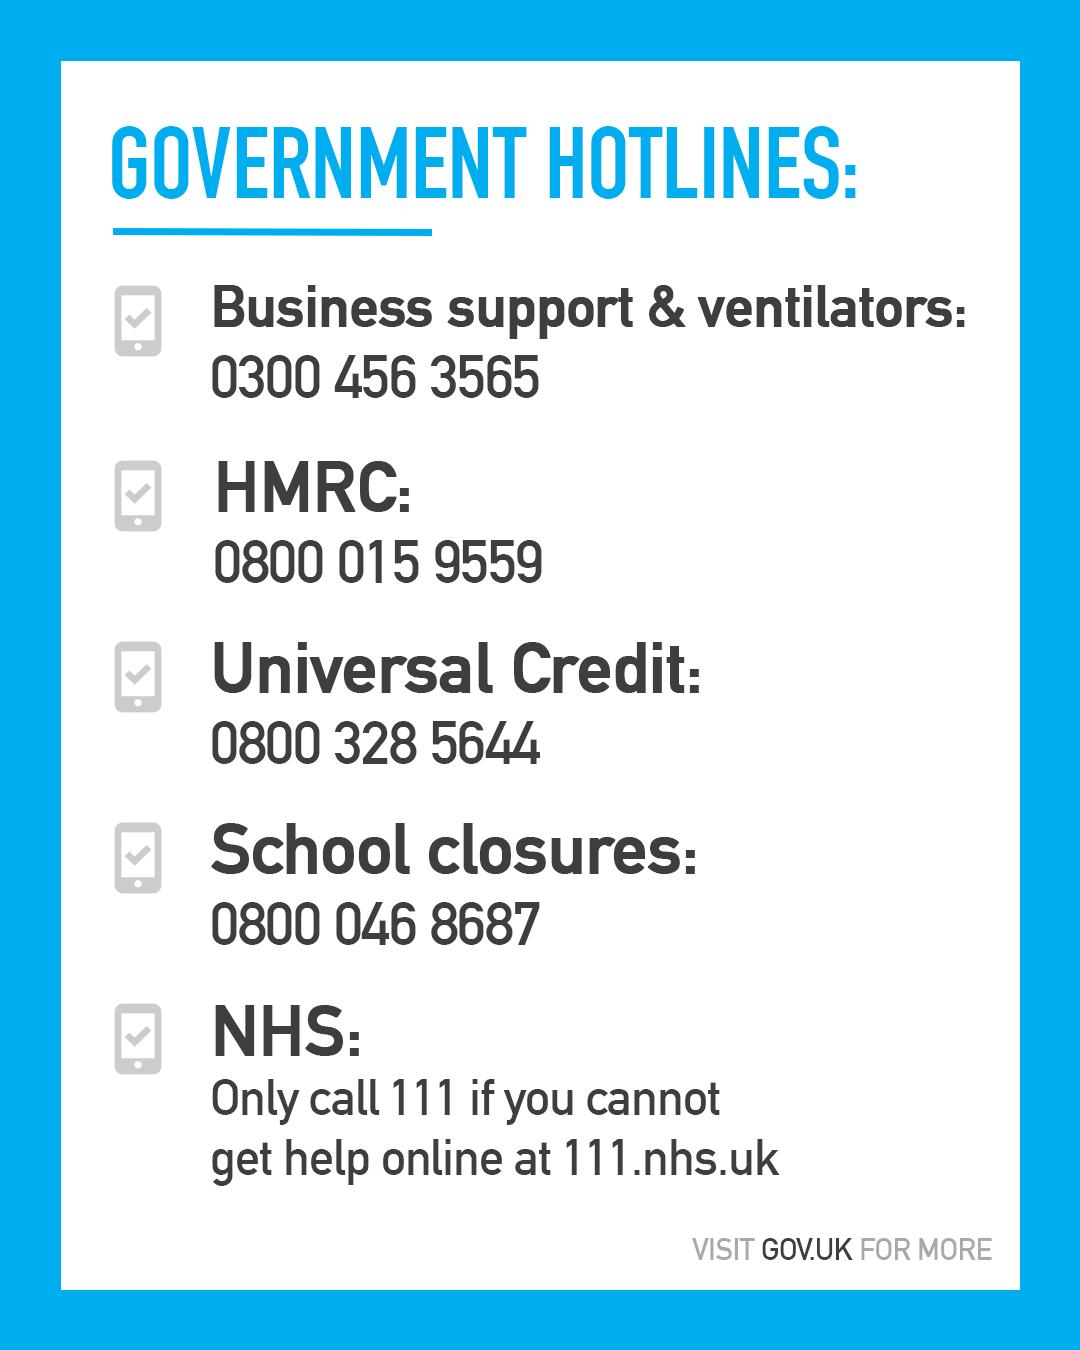 Government hotlines